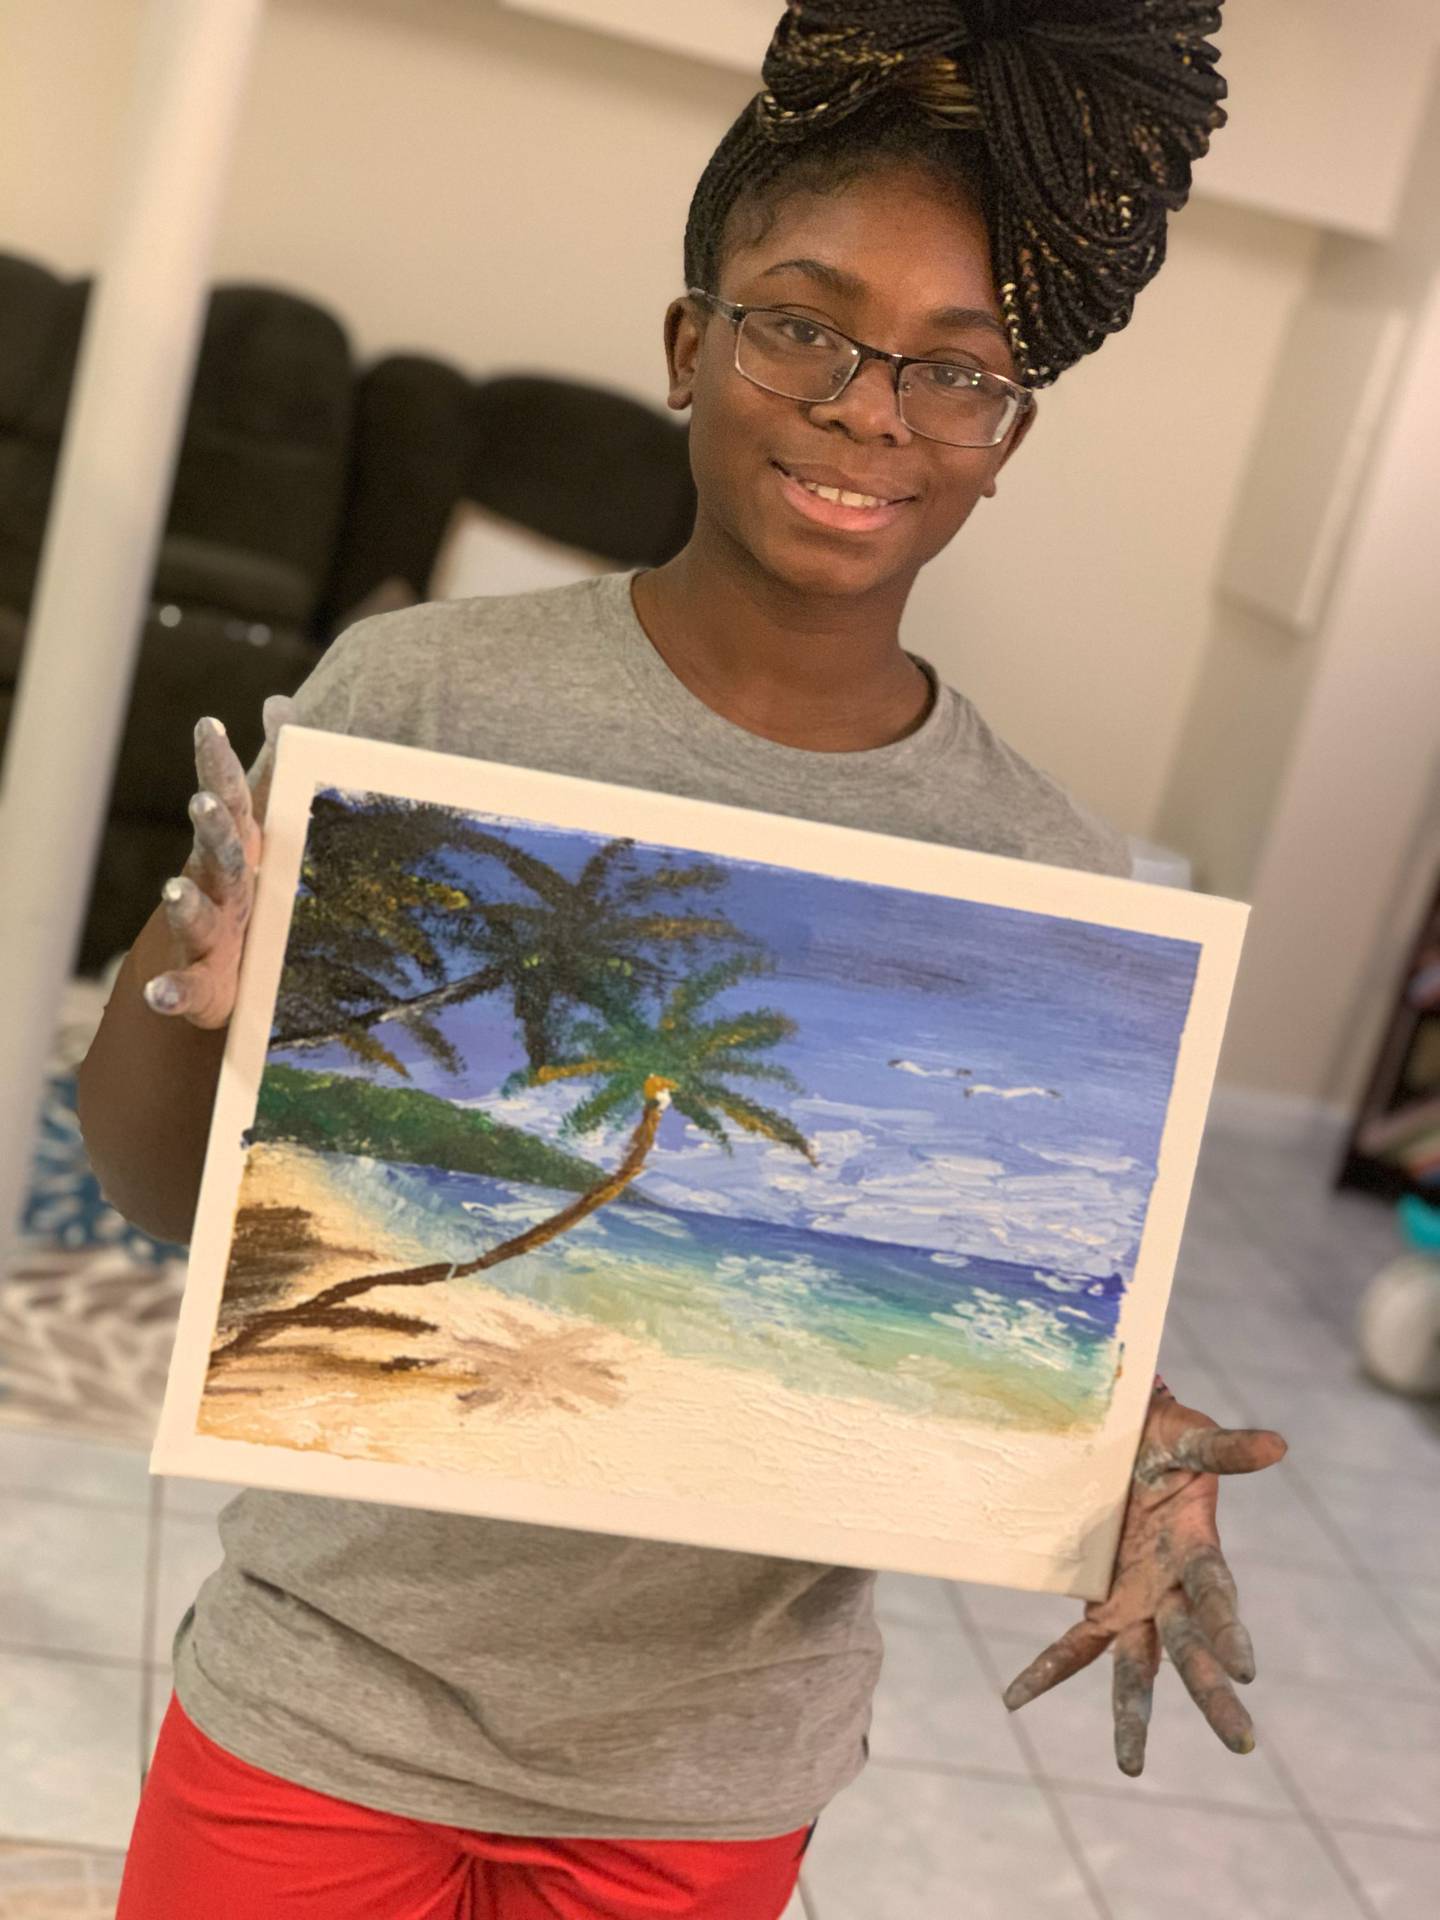 Dykota Morgan, 15, of Bolingbrook was an athlete, artist, activist and scholar. She died of complications from COVID-19. Dykota is holding the first picture she ever painted.